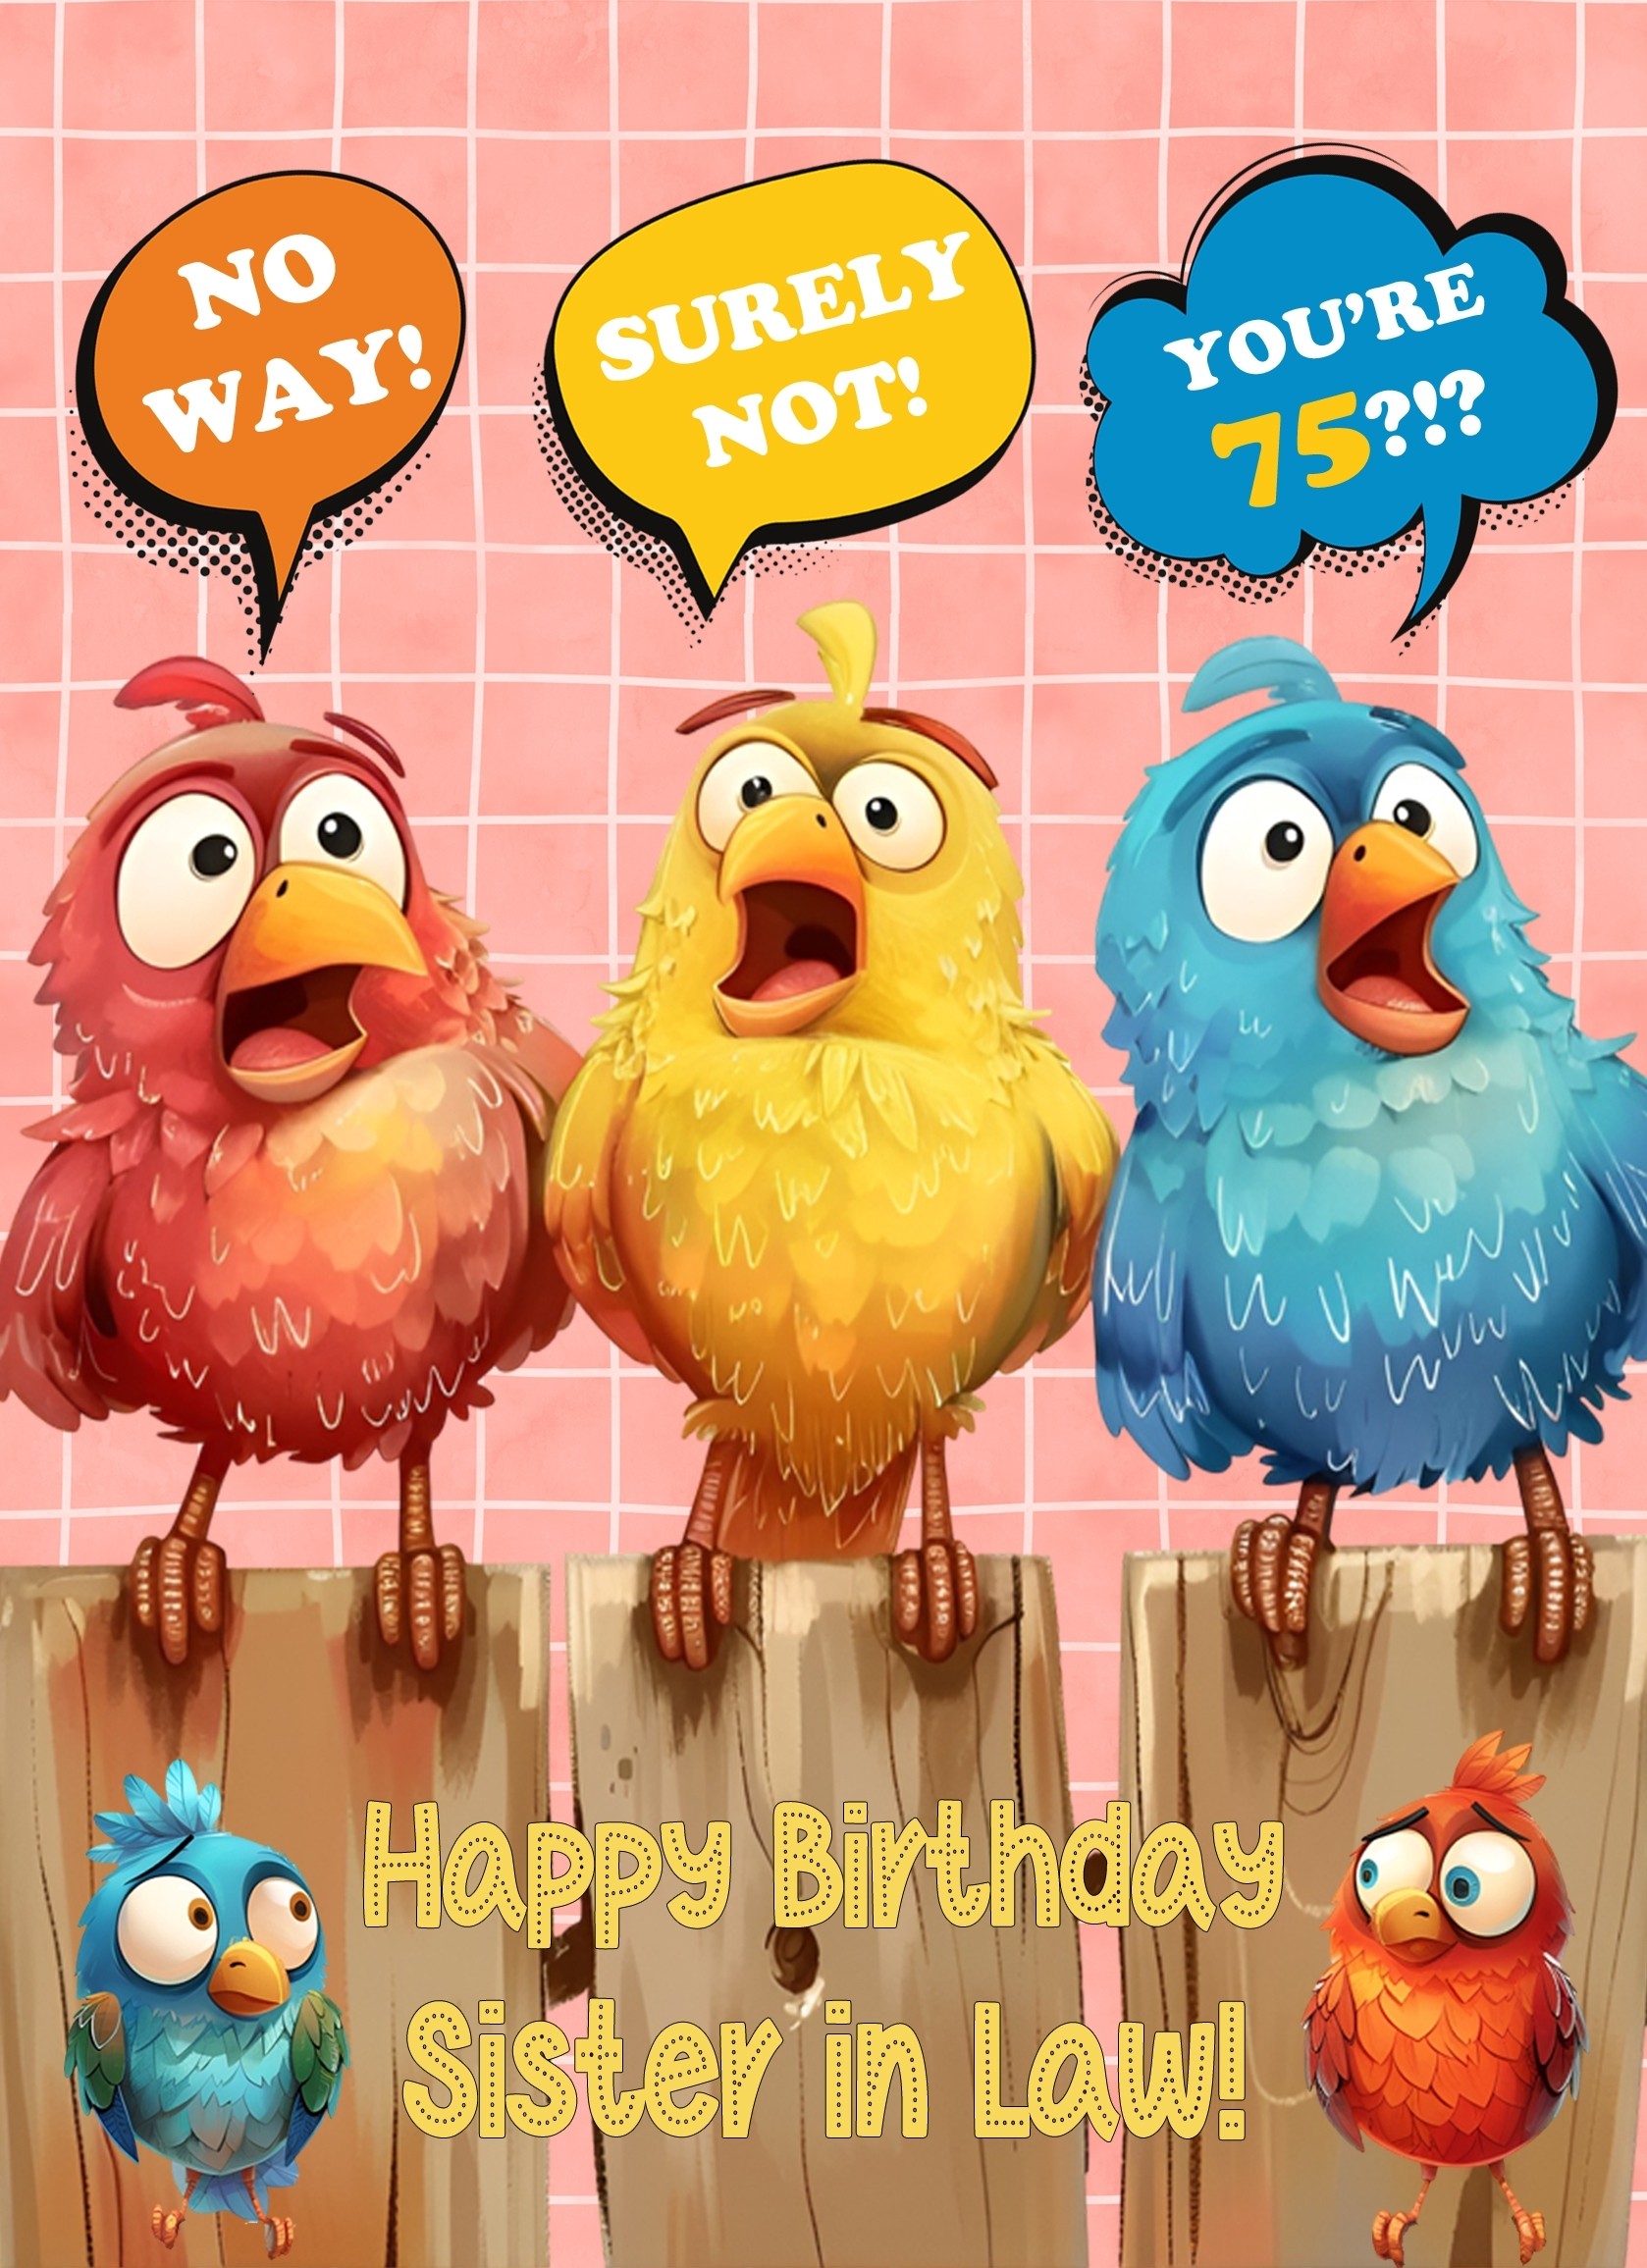 Sister in Law 75th Birthday Card (Funny Birds Surprised)